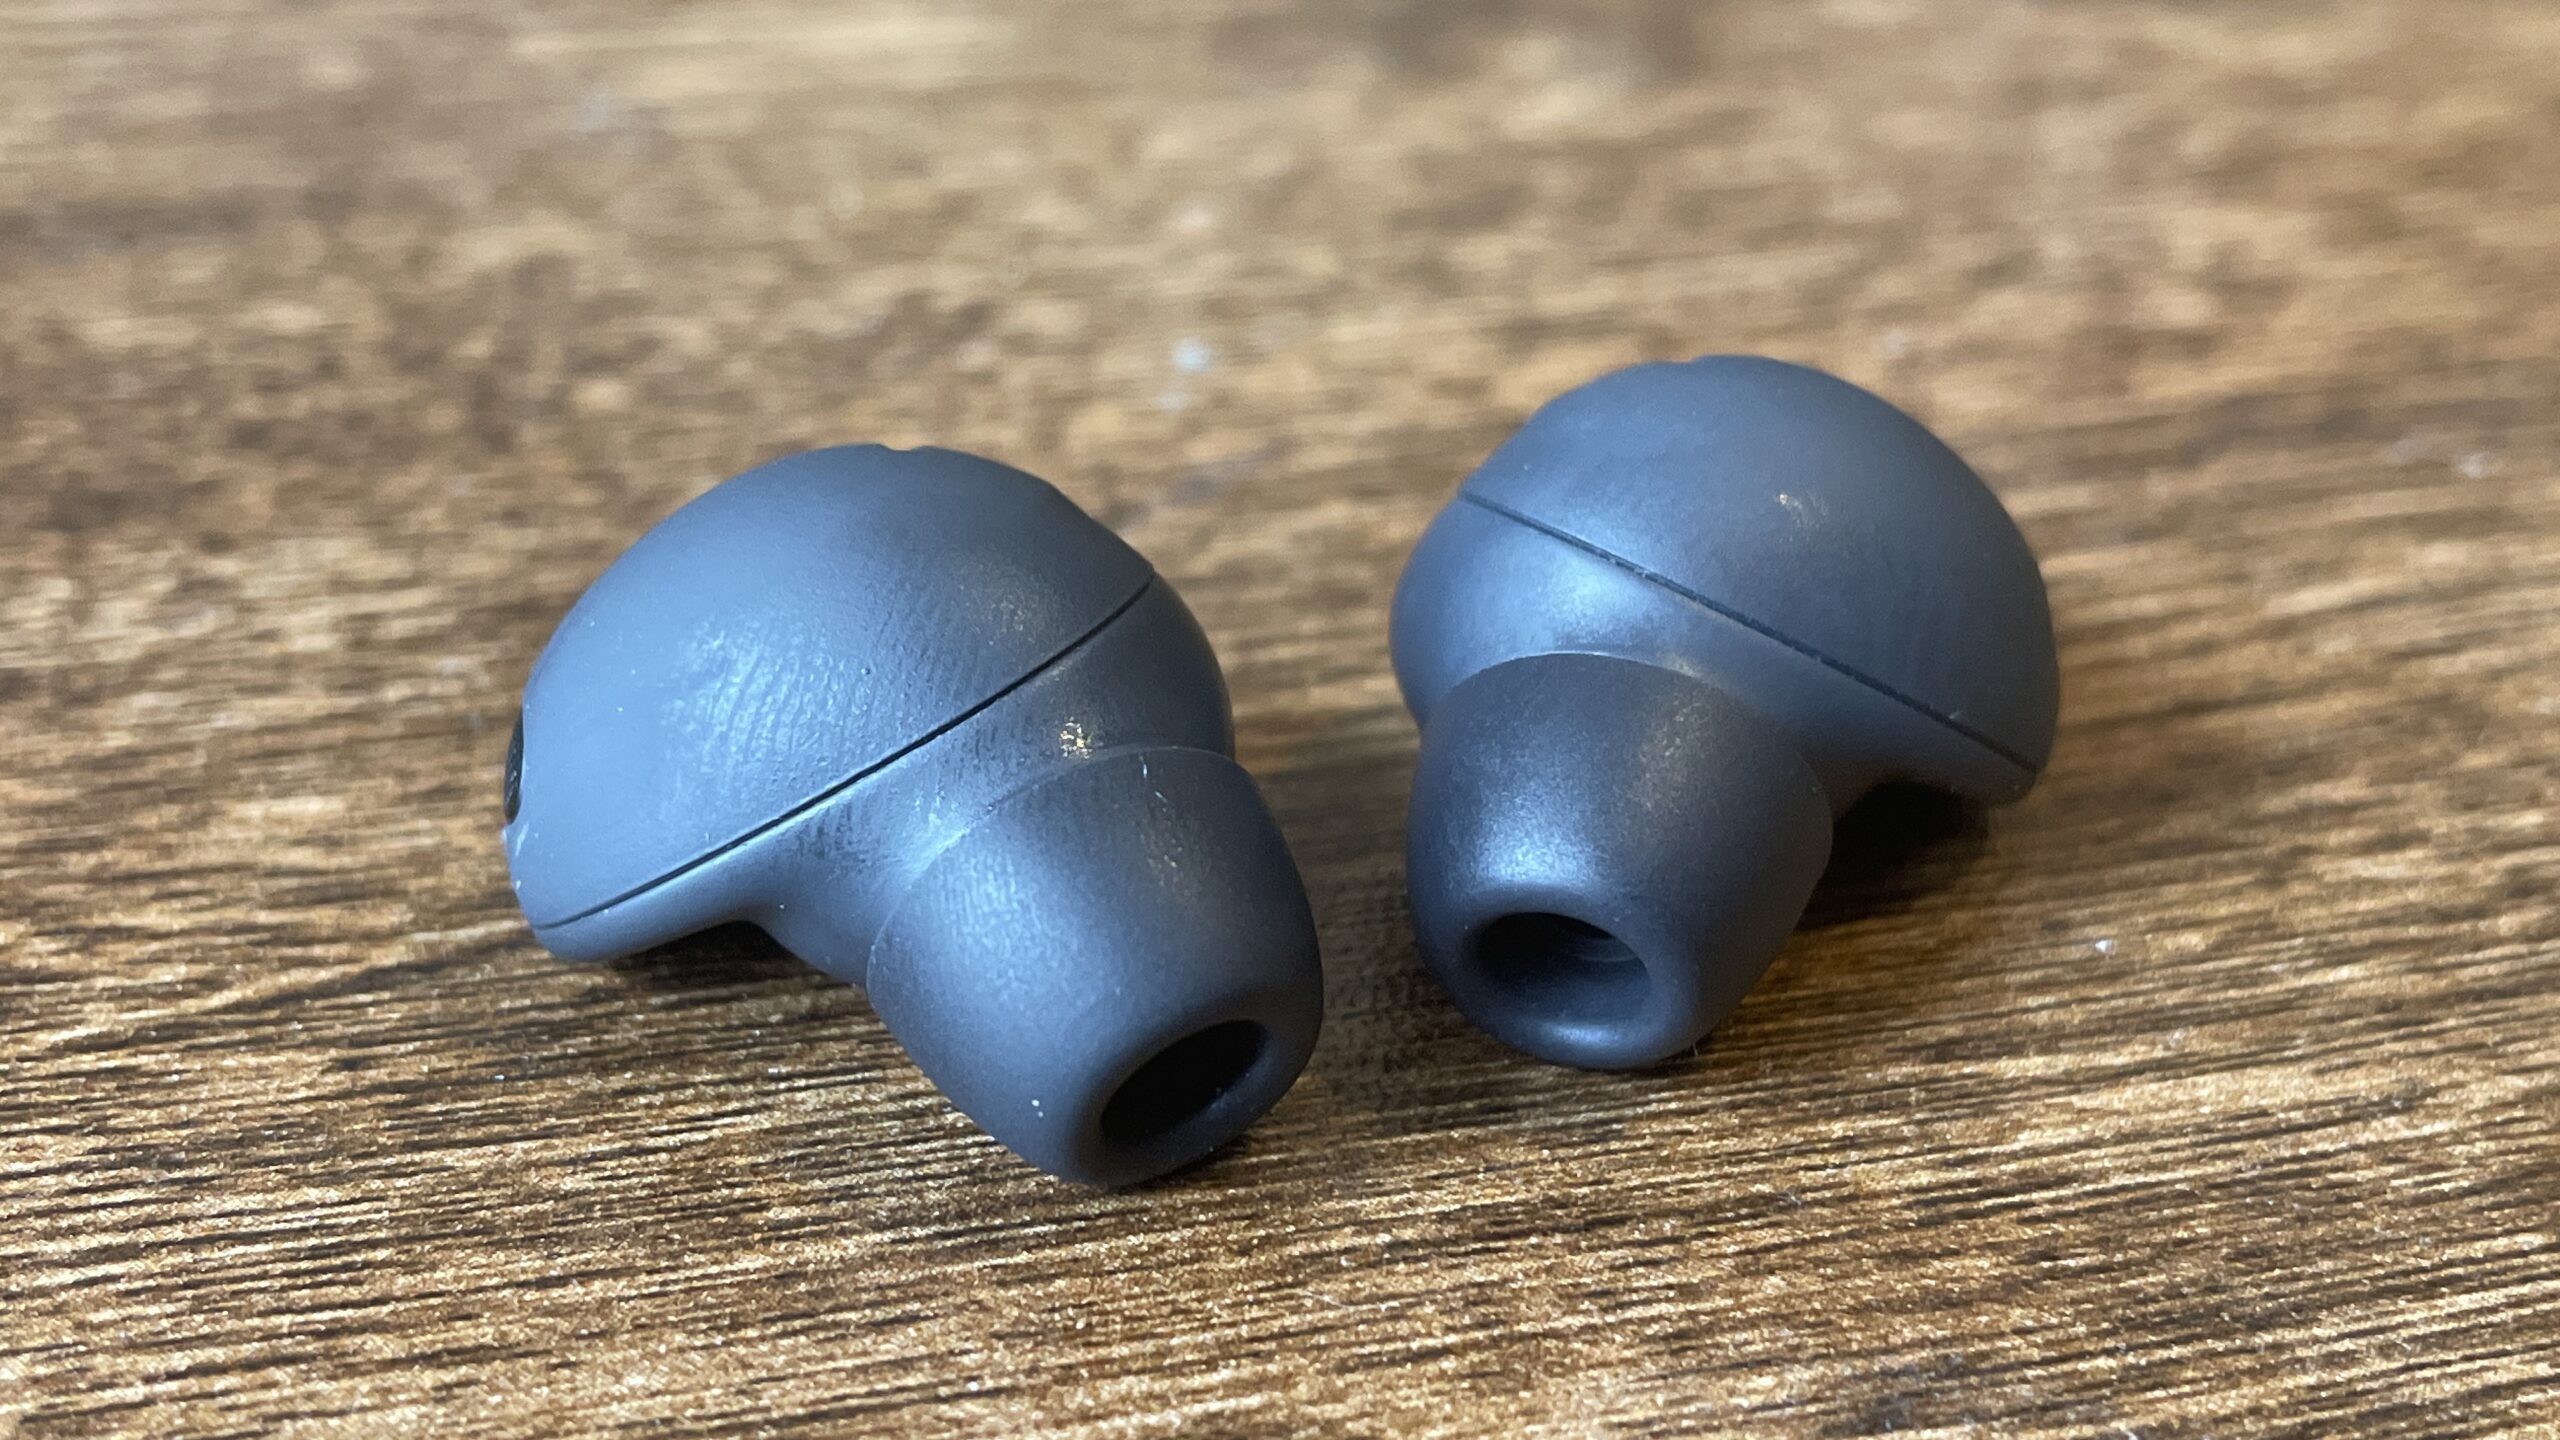 Samsung Galaxy Buds Pro not as good as the Apple AirPods Pro, says